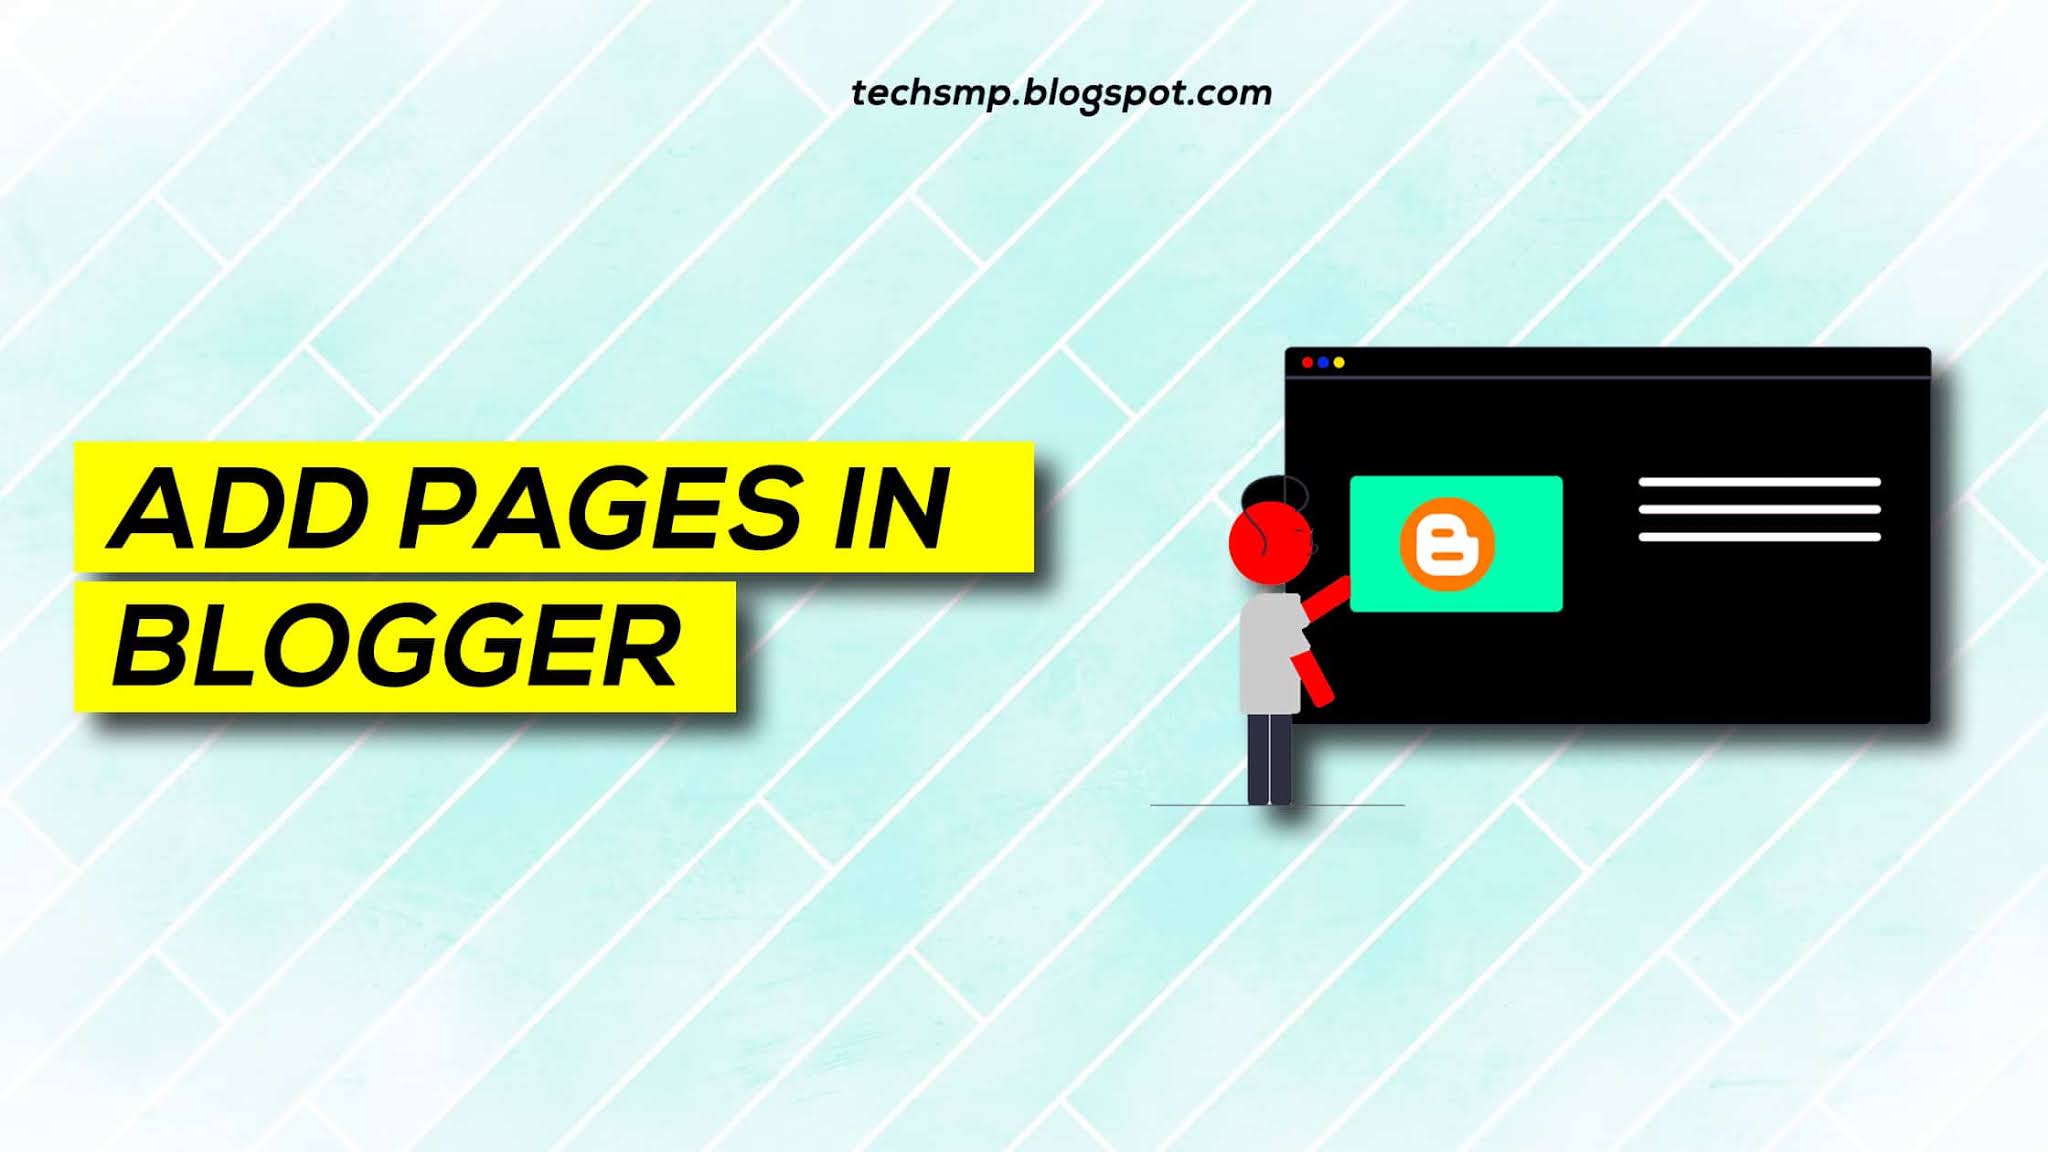 How to add Pages in Blogger